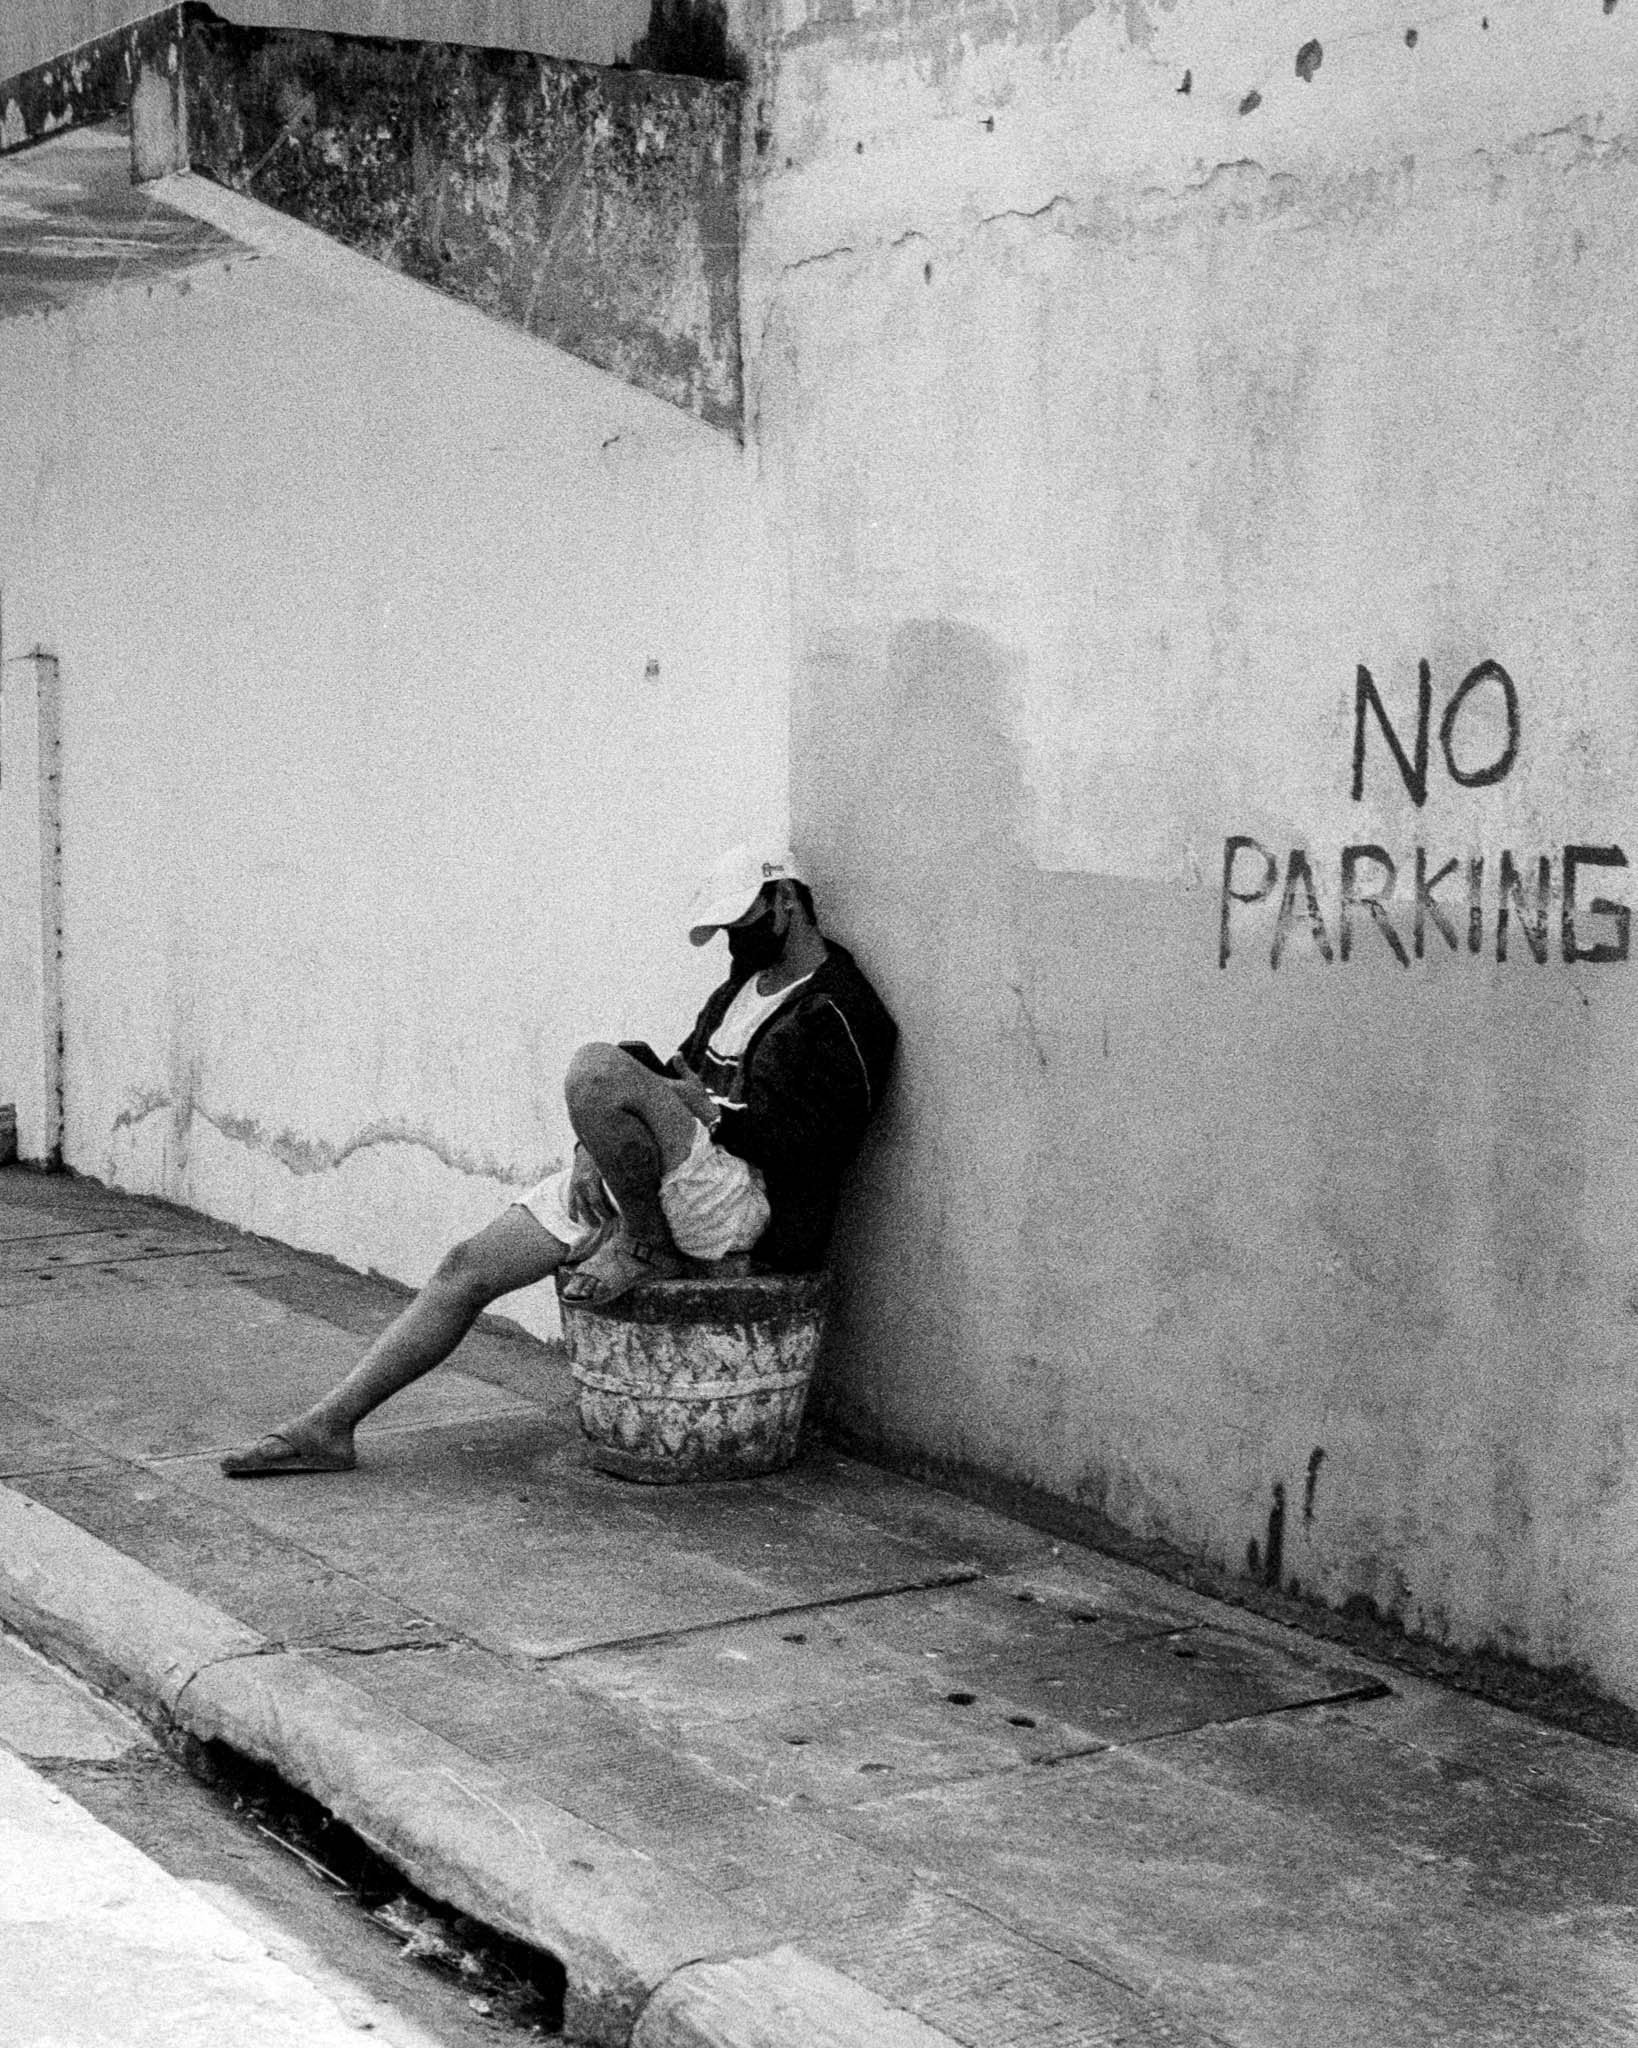 Black and white photo of lone individual seated under a NO PARKING sign, suggesting urban defiance.